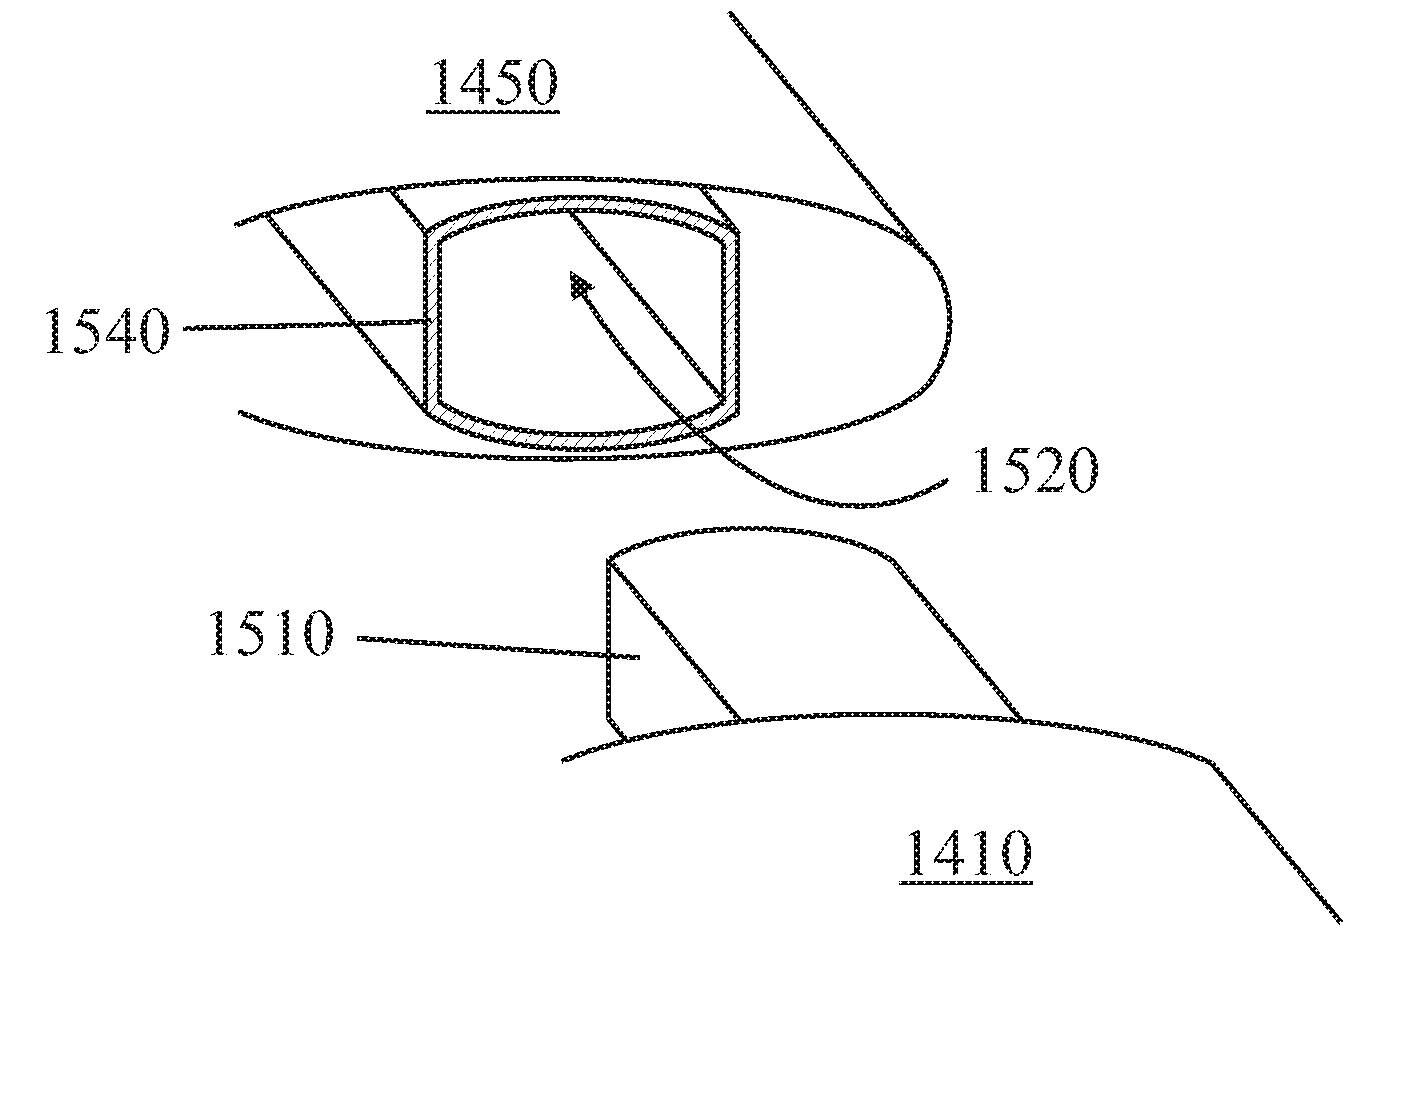 Modular rotor blade for a wind turbine and method for assembling same